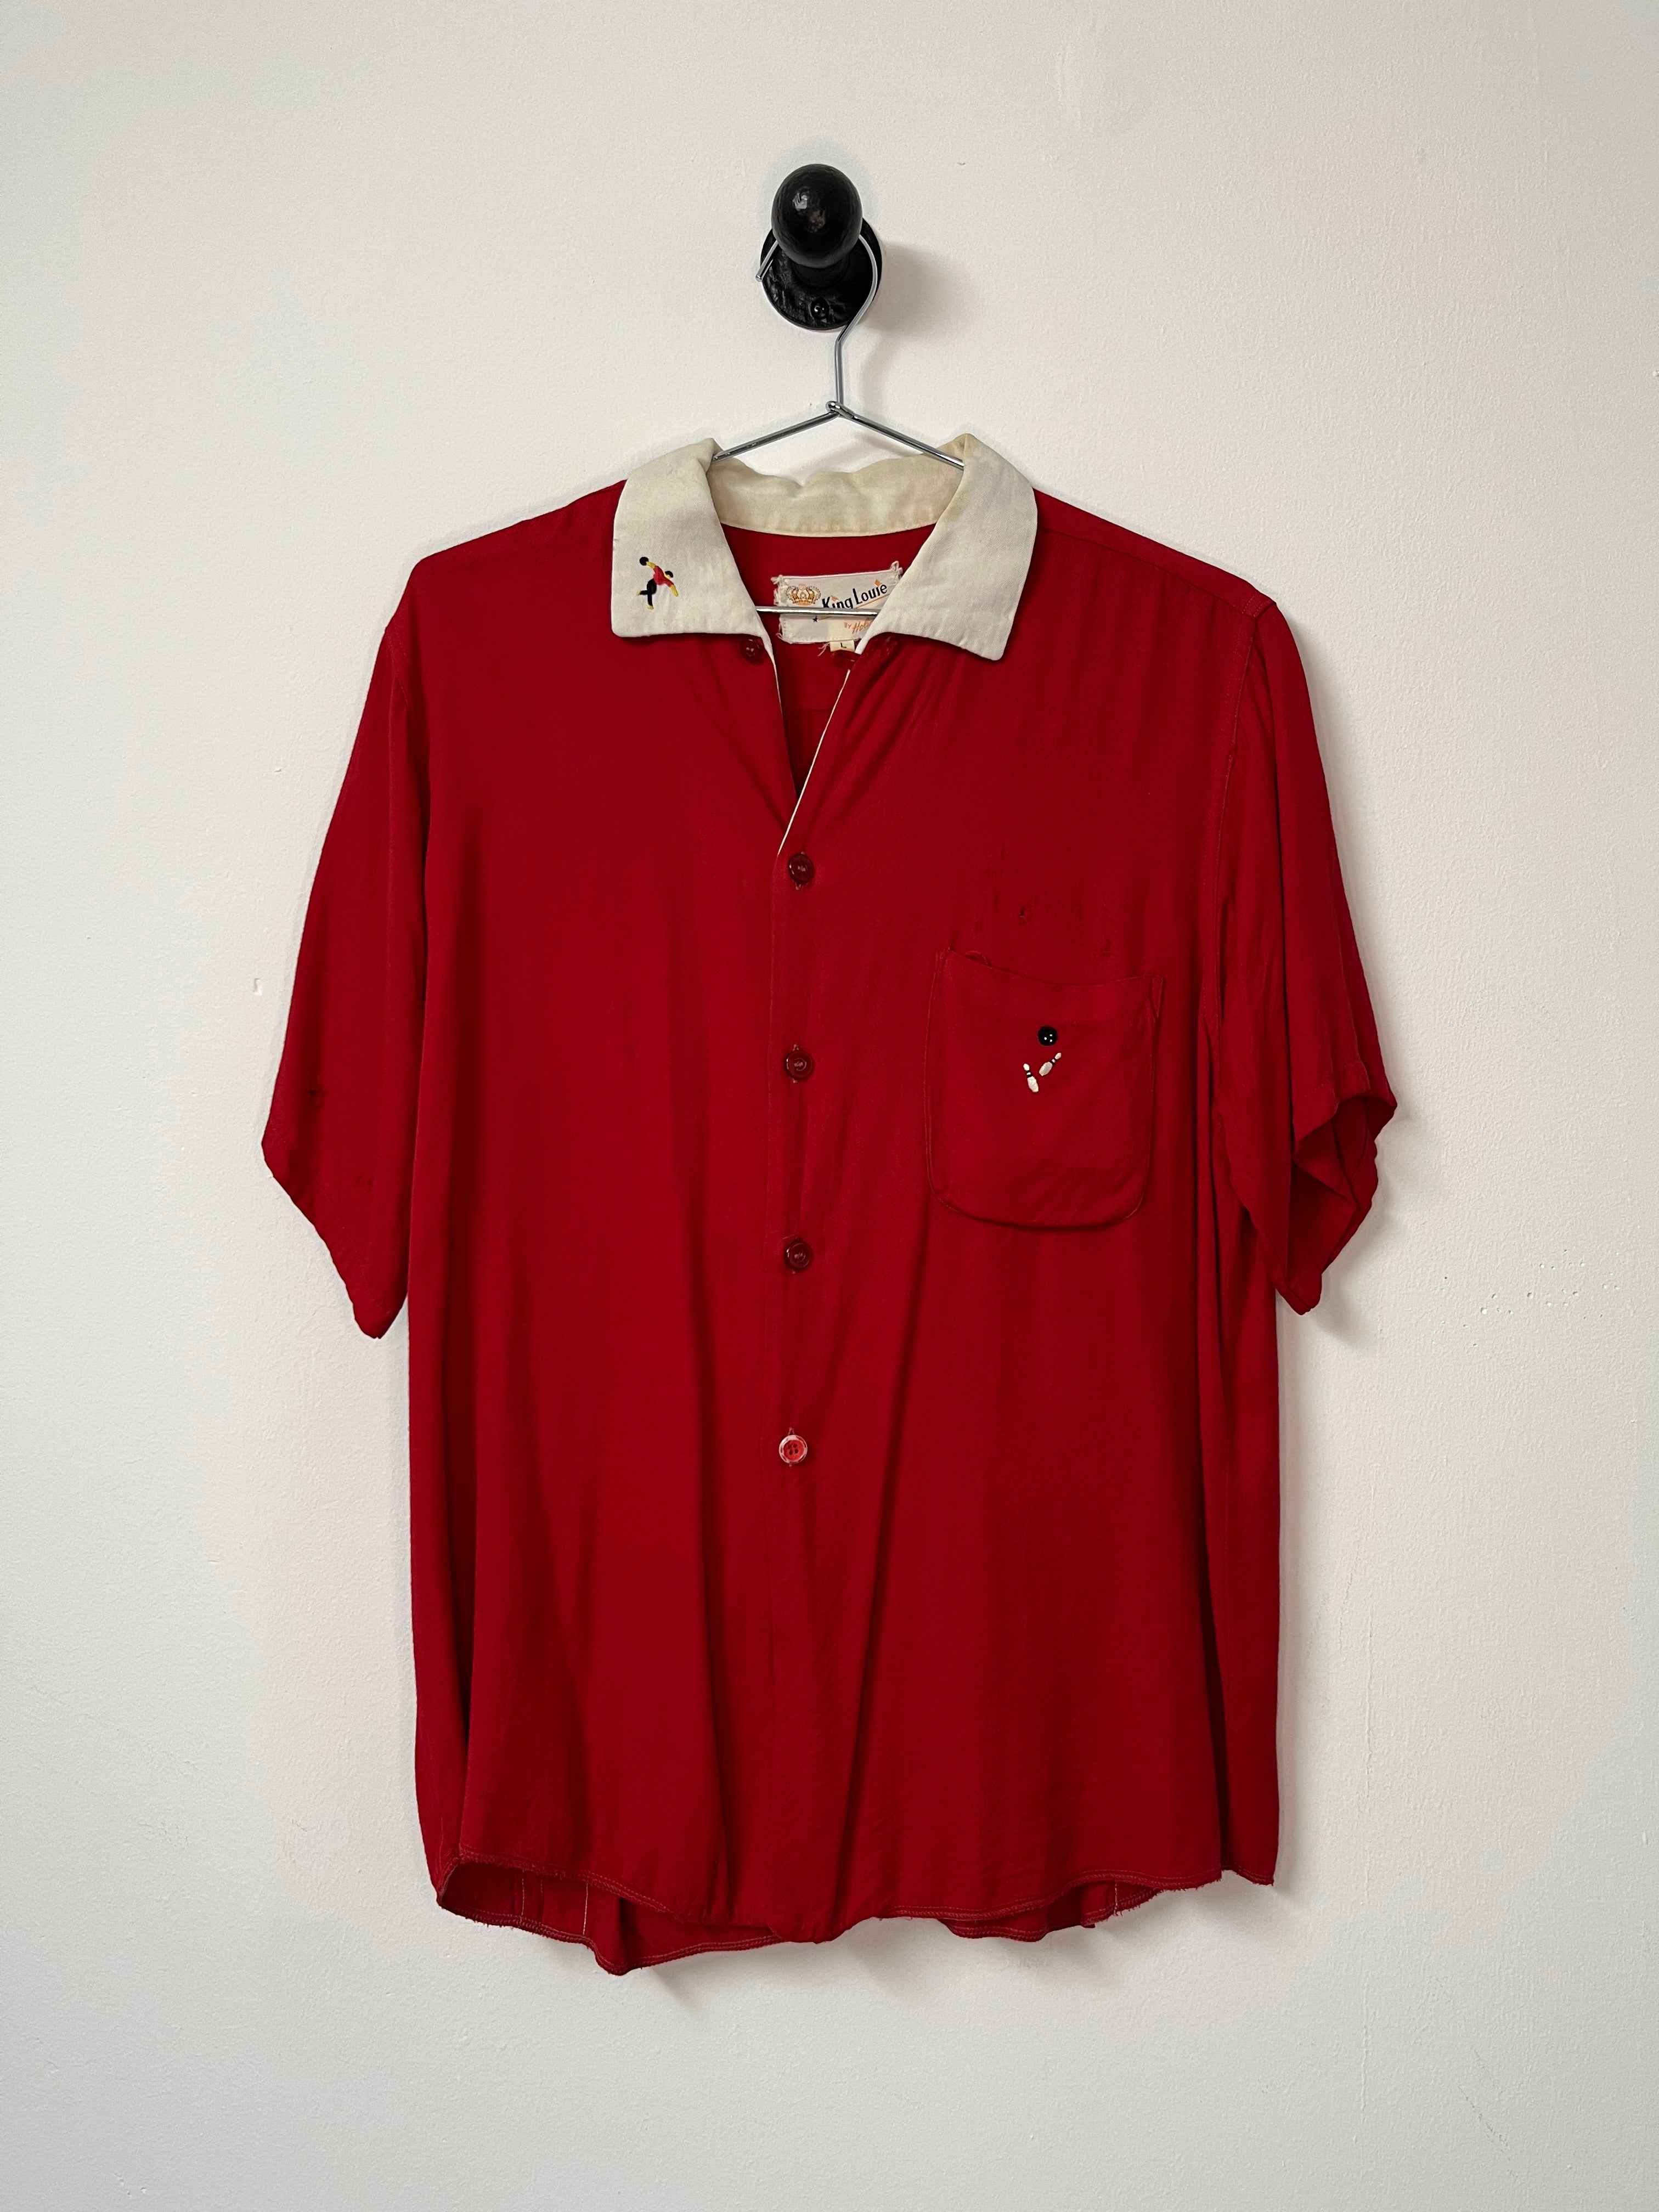 1950s King Louie by Holiday ‘Jerry’s Ming House’ Chinese Restaurant Loop Collar Bowling Shirt - Scarlet Red - M